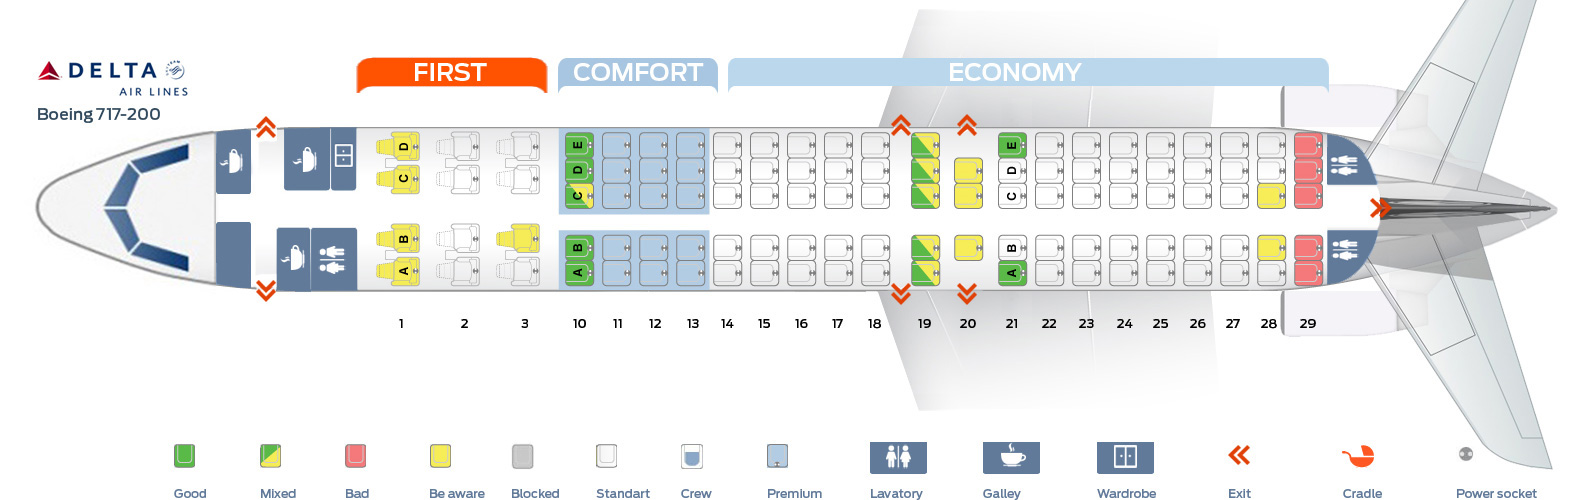 Delta Seating Chart 717